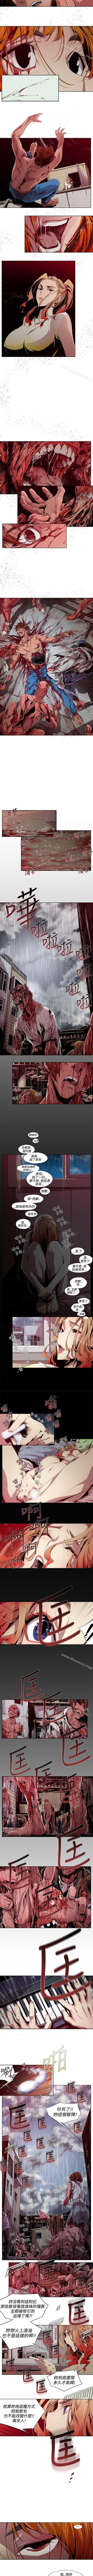 Girlfriends 陰濕路 1-41 Couples Fucking - Page 8